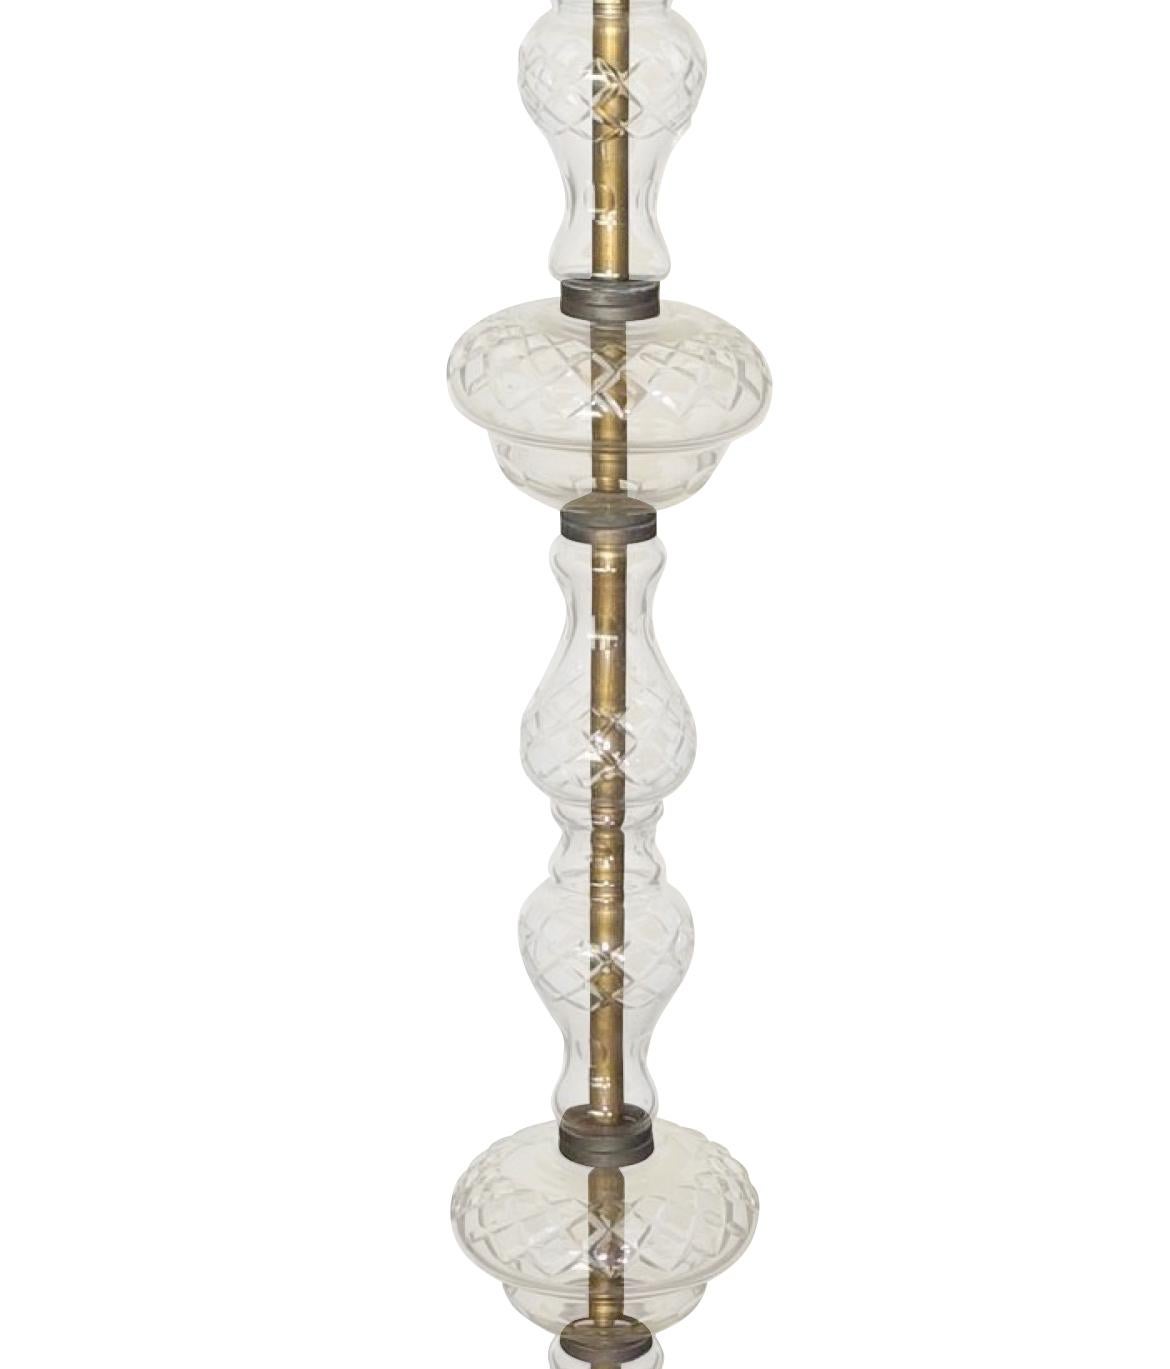 1940s Italian five-arm Murano glass candelabra floor lamp.
The entire column is Murano glass.
There are 64 decorative Murano glass crystals.
The base is decorative brass.
Recently rewired.

  